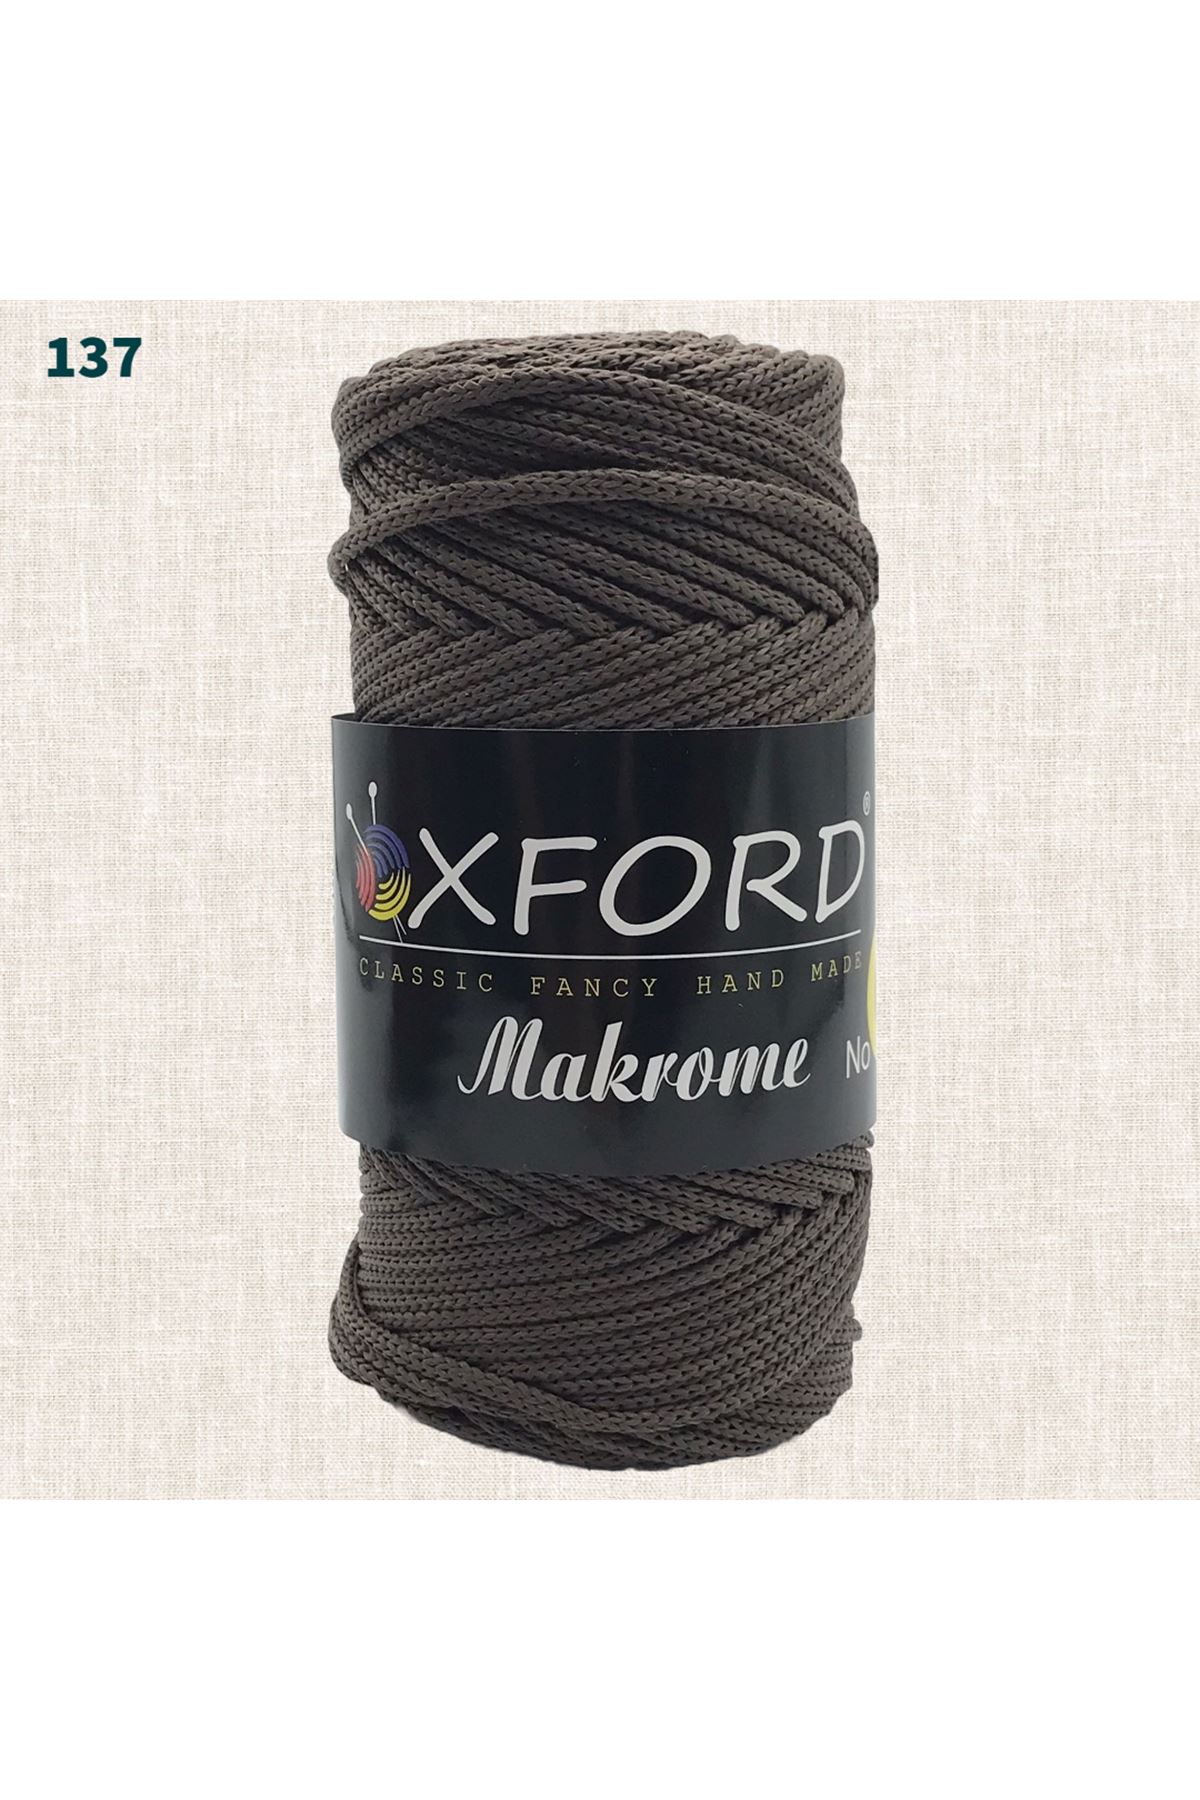 Oxford 6 No Makrome - 137 Taupe